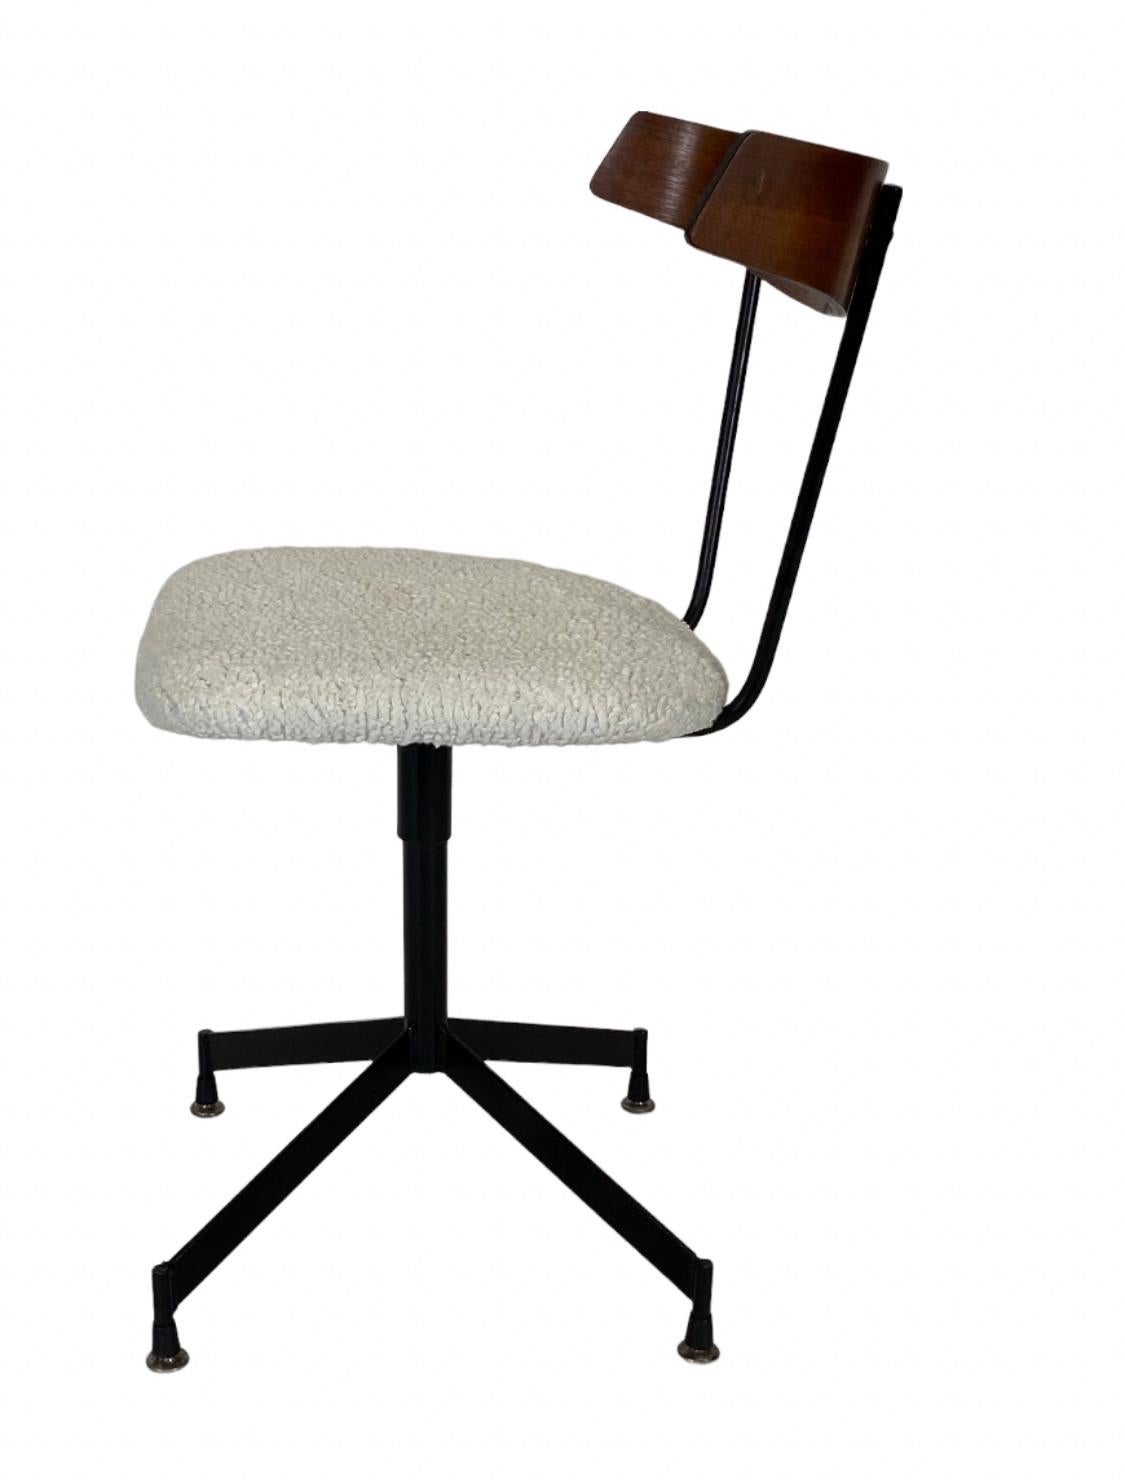 20th Century Clifford Pascoe Desk or Office Chair on Swivel Base For Sale